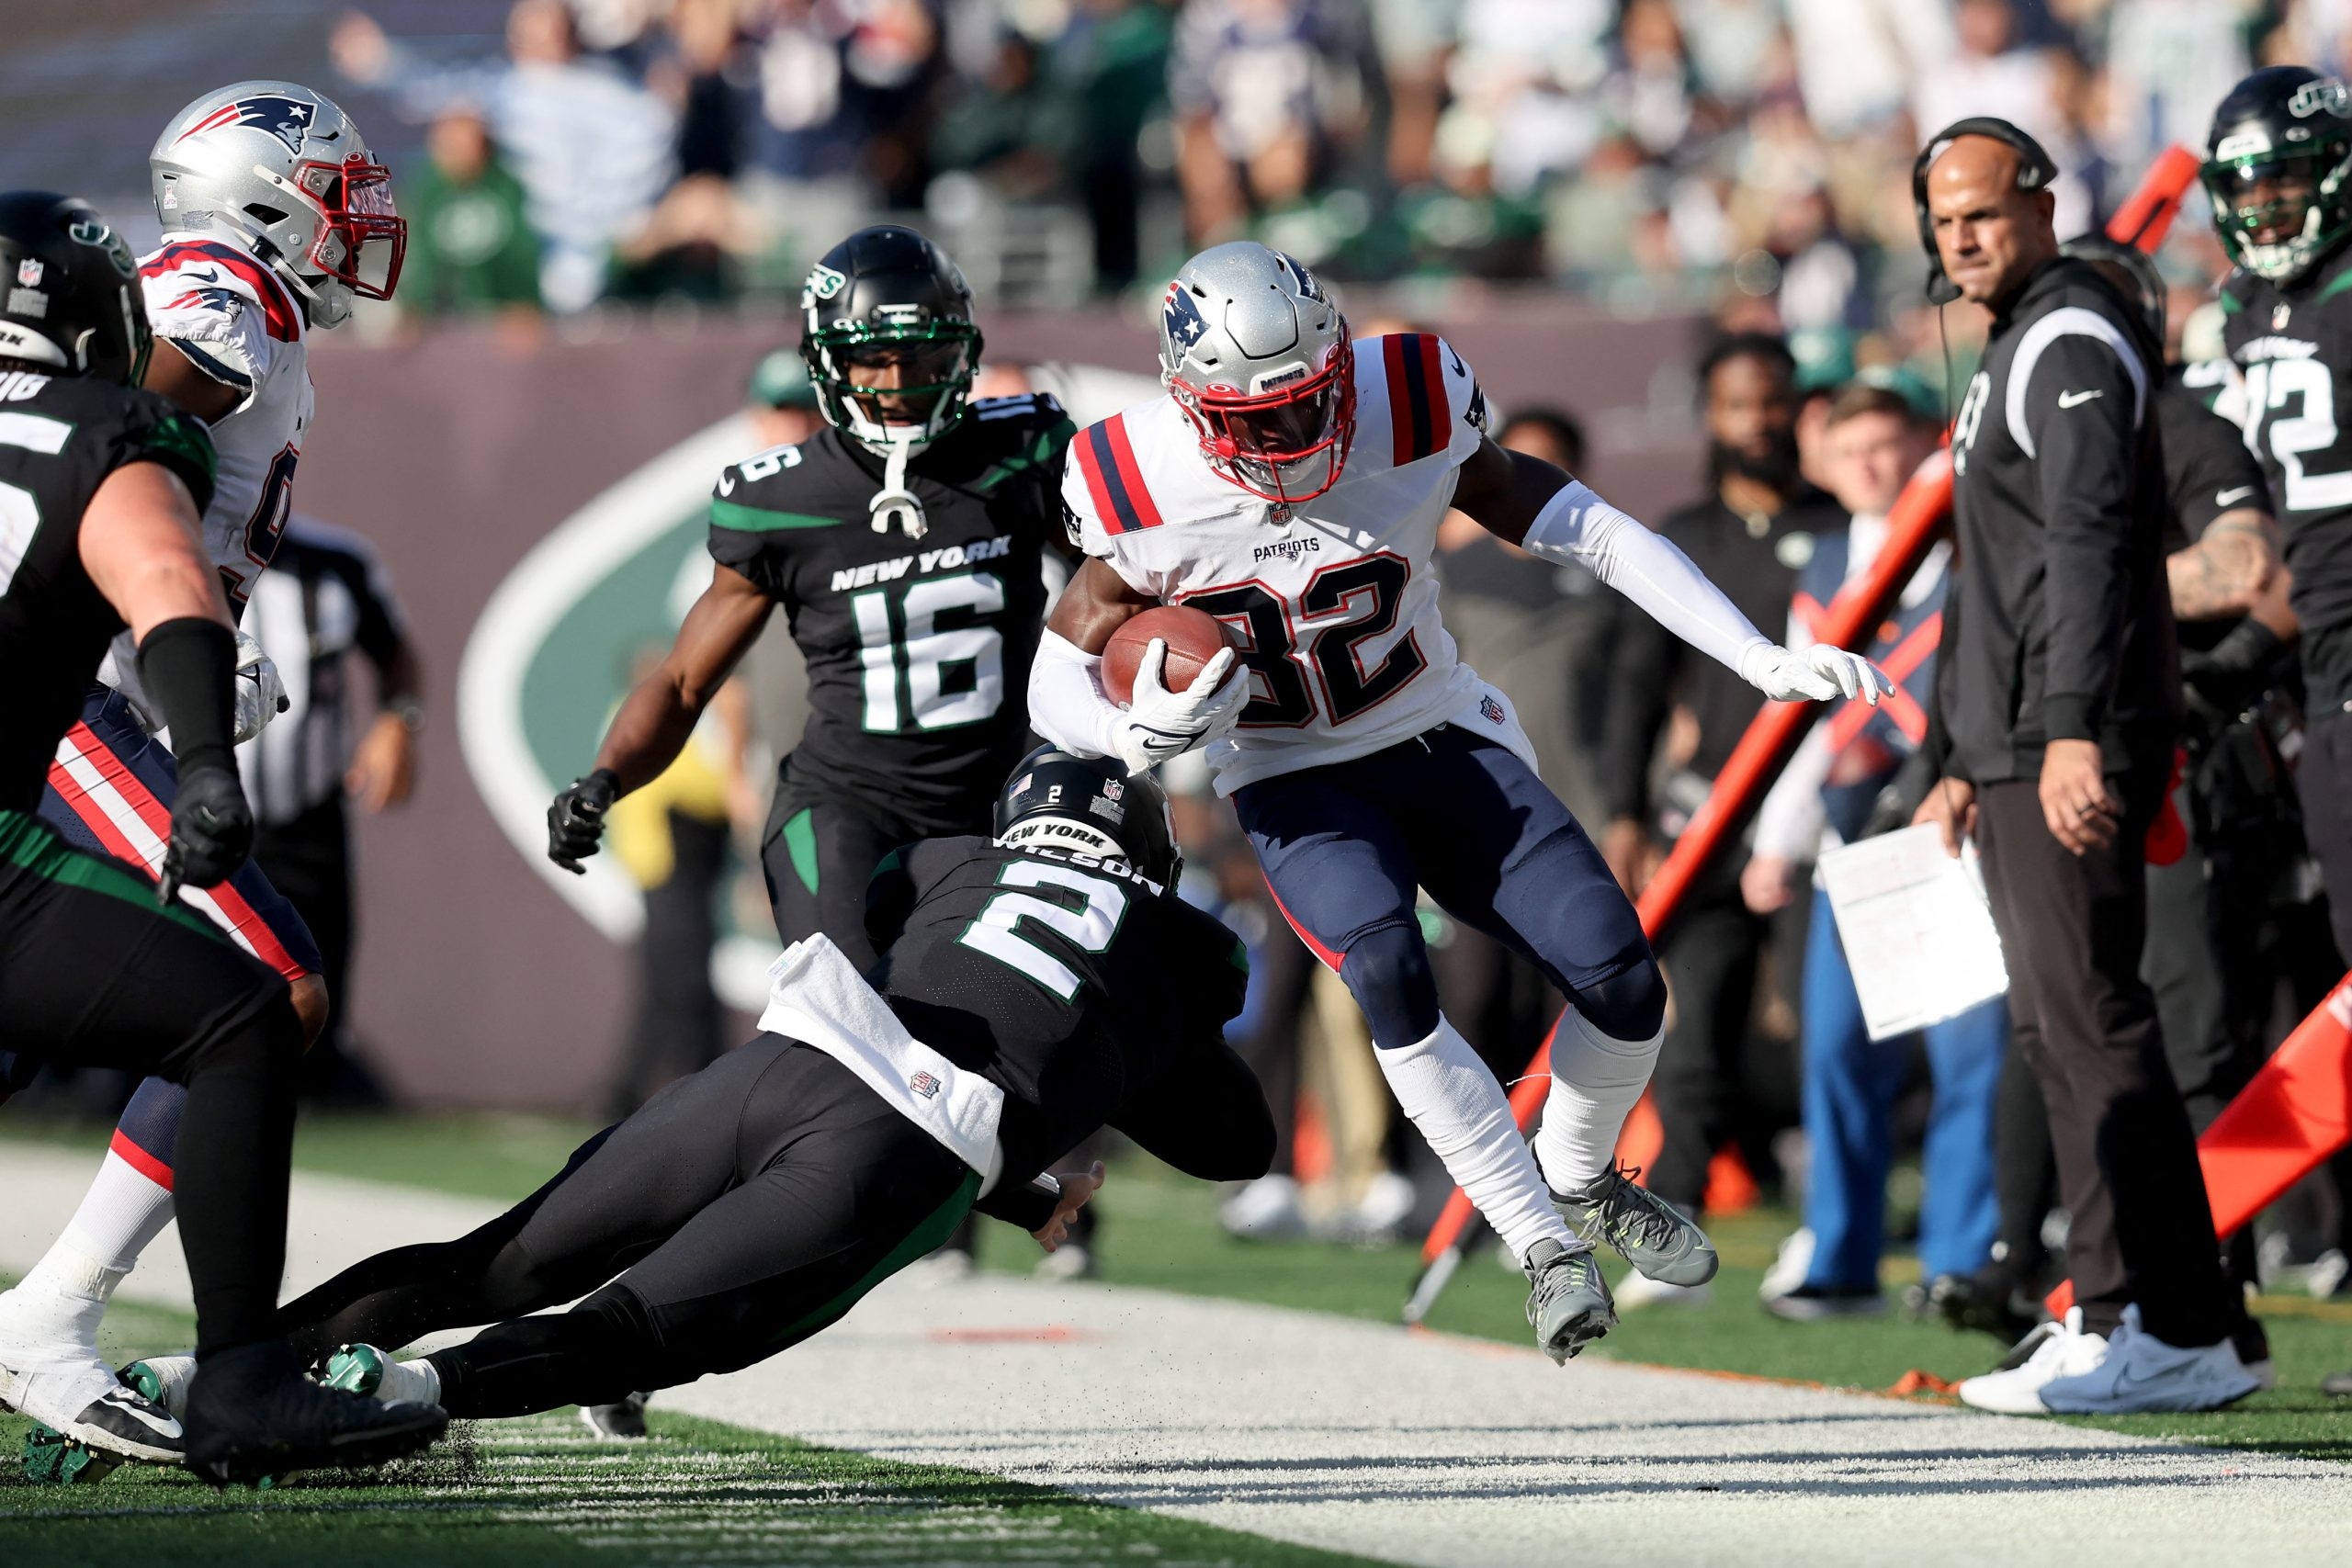 Jets Move Into Playoff Position, 26-20 In Overtime Over Patriots